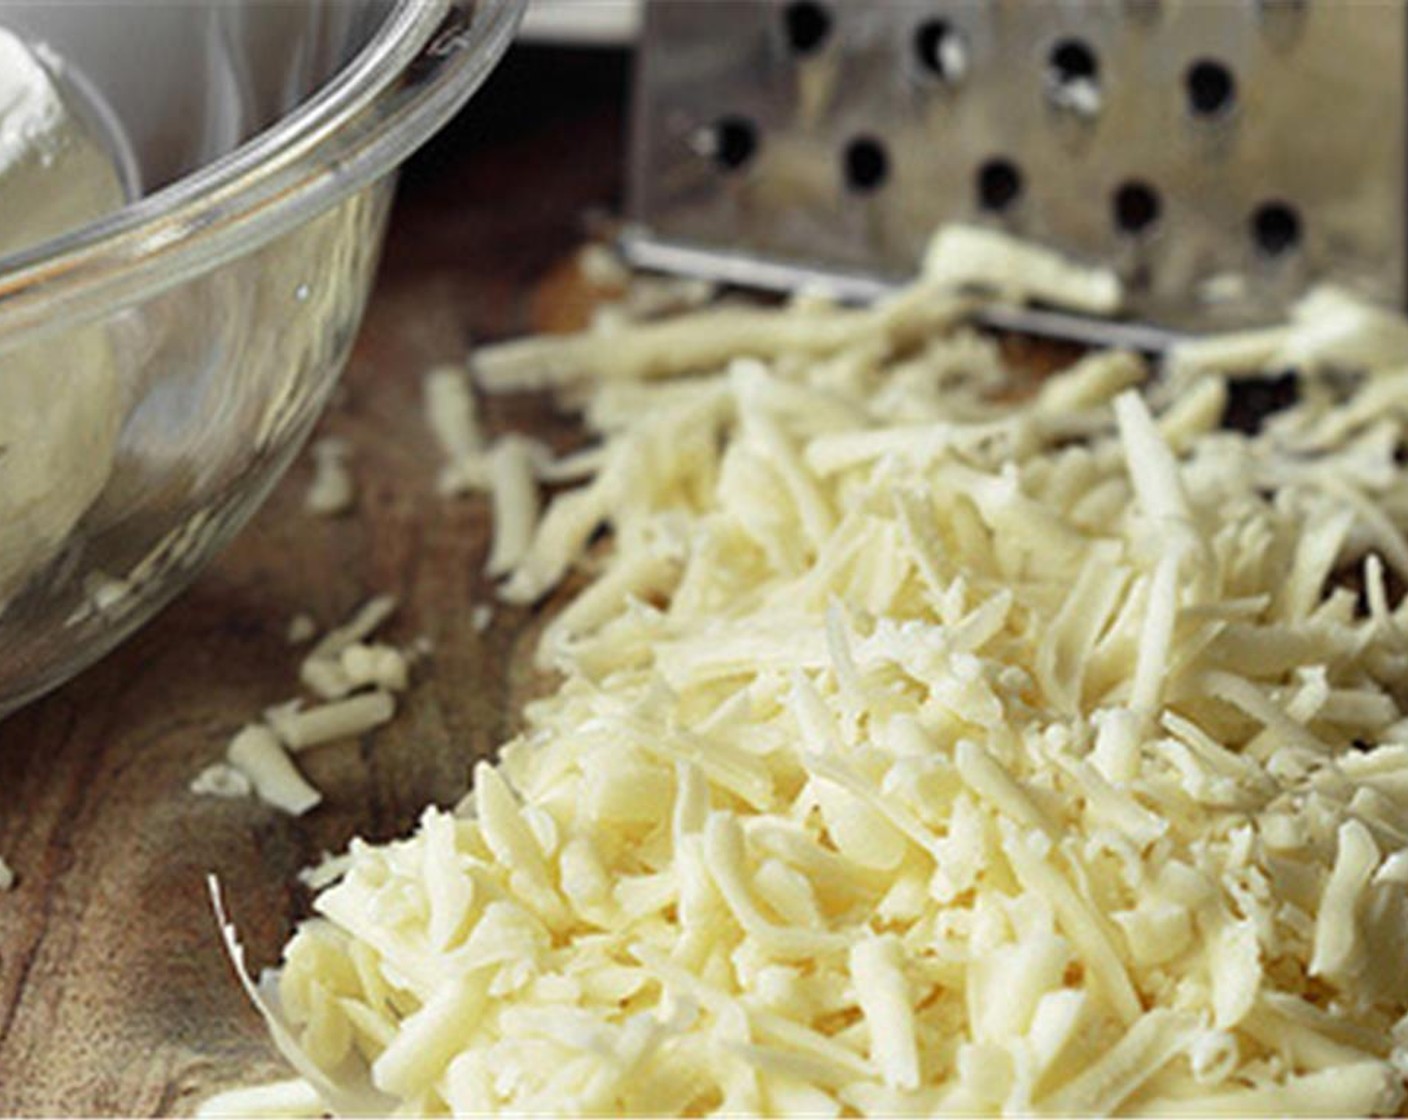 step 2 Shred the Monterey Jack Cheese (1 cup). Crumble the Queso Fresco (1/4 cup). Soften the Philadelphia Original Soft Cheese (1 cup). Chop the Yellow Onion (1) and Garlic (2 cloves).